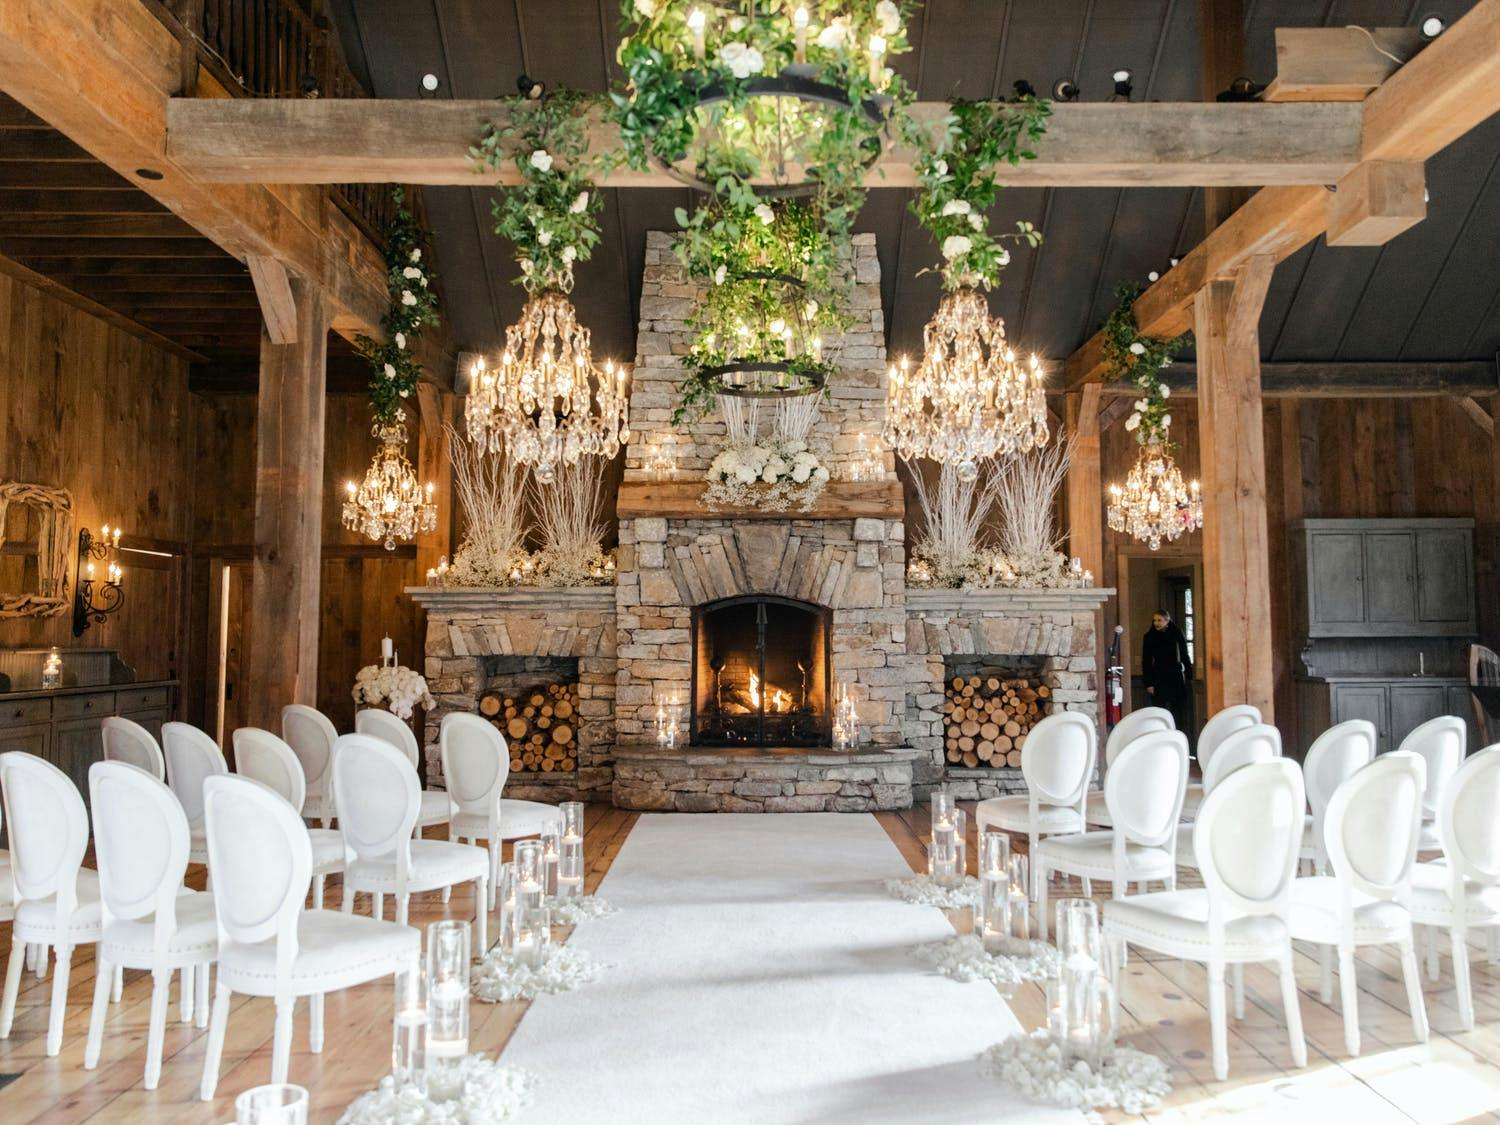 Wedding ceremony with two-story stone fireplace, greenery, and glittering chandeliers | PartySlate